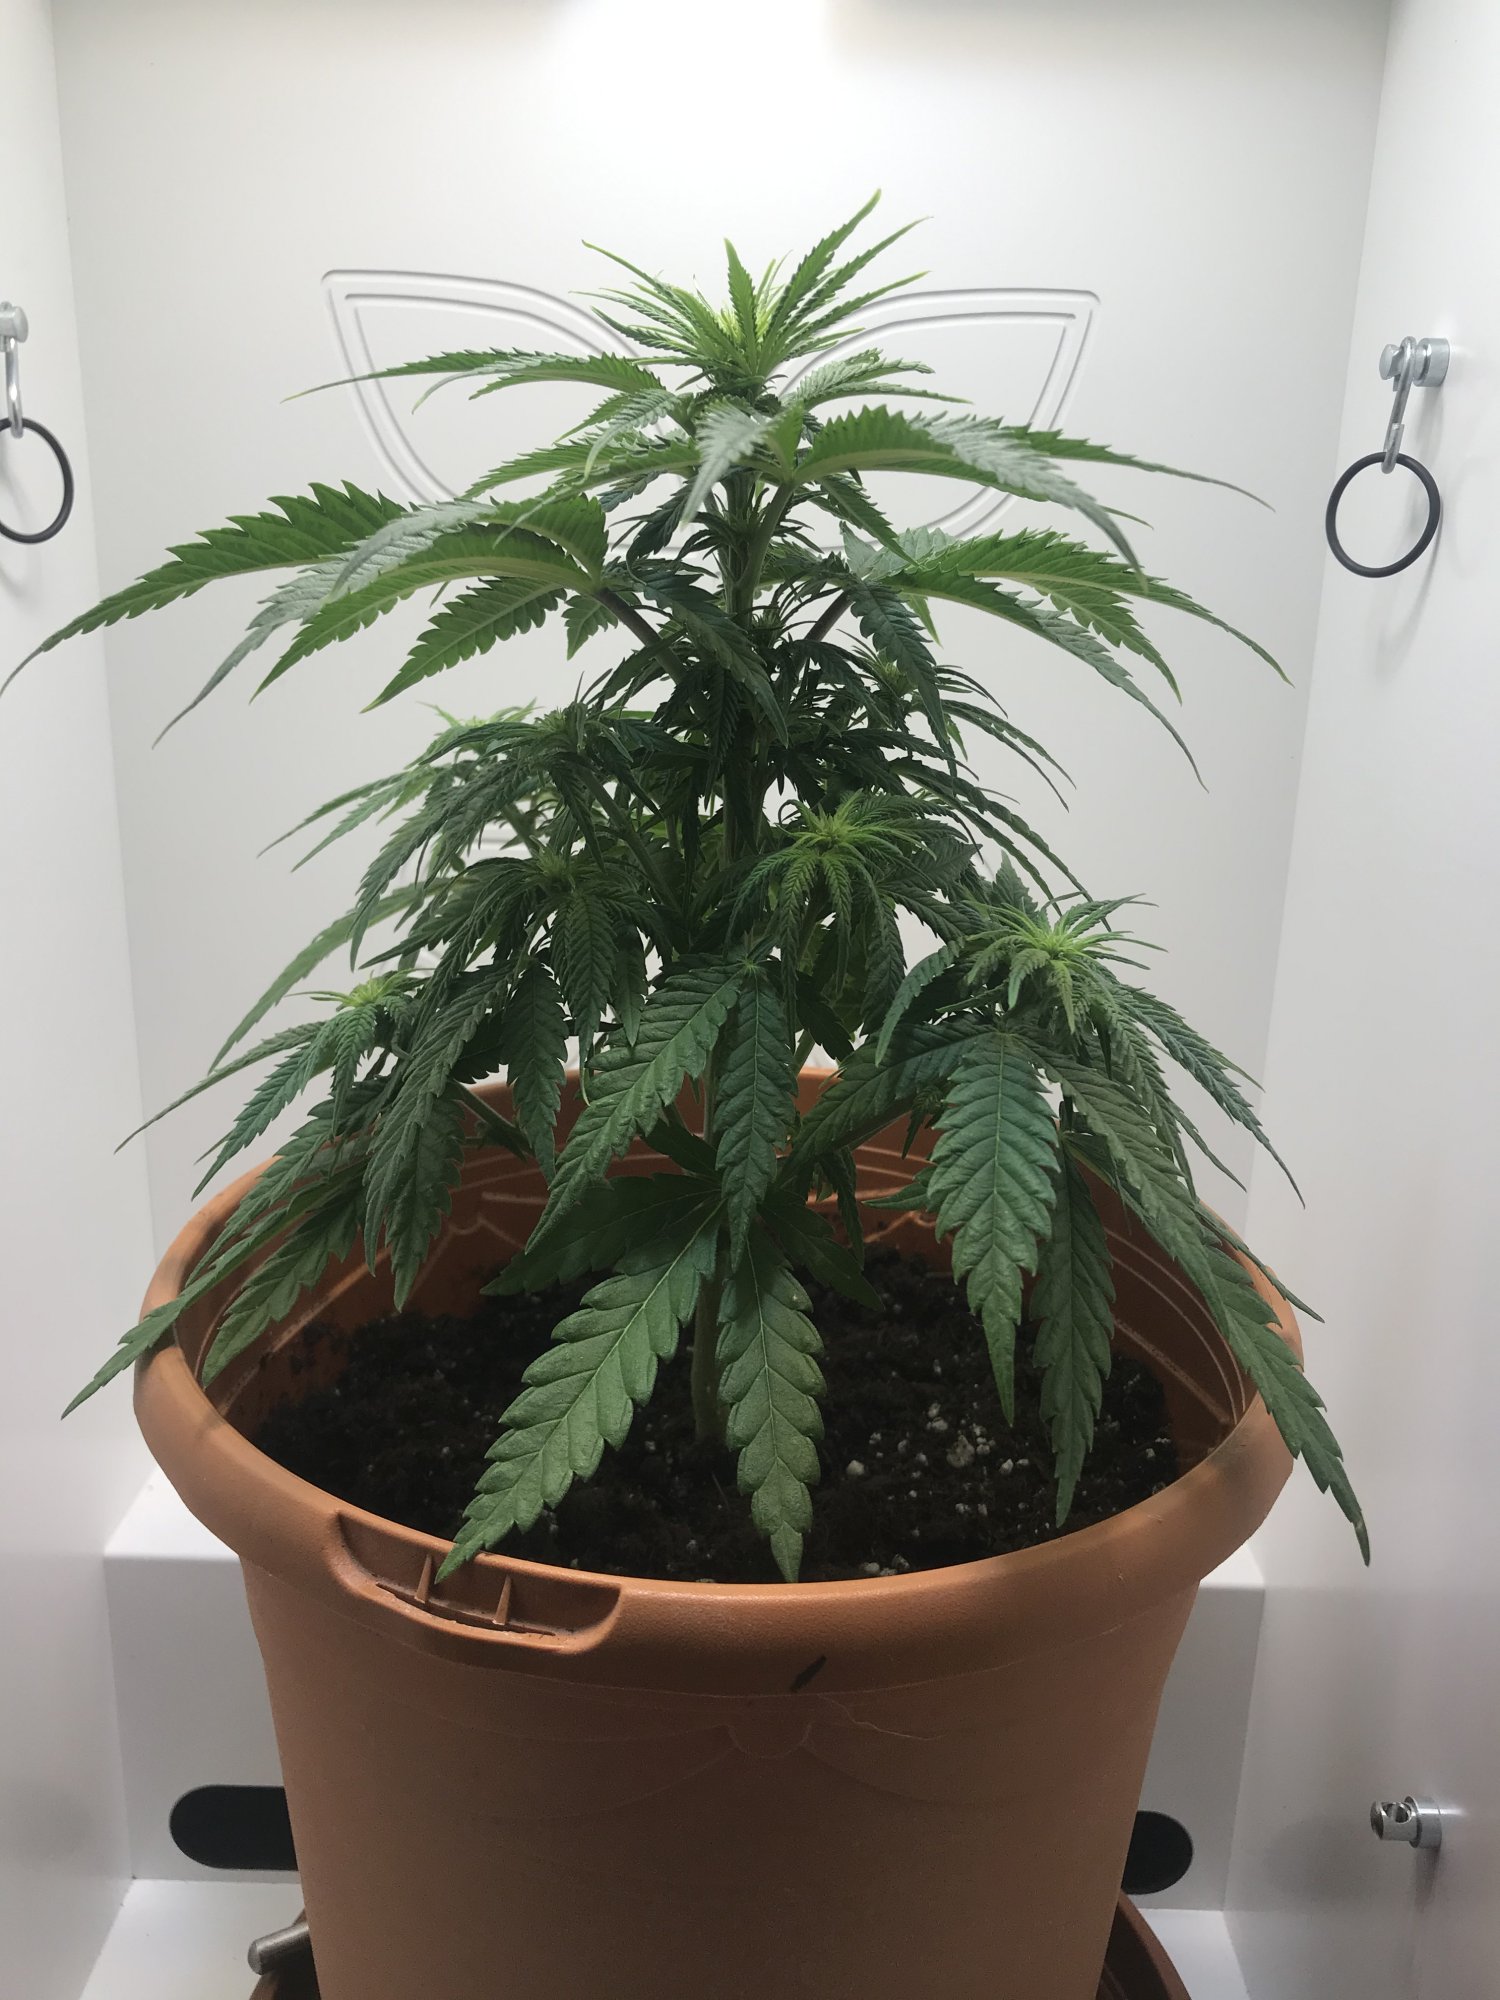 Is this a root issue nute deficiency or something else